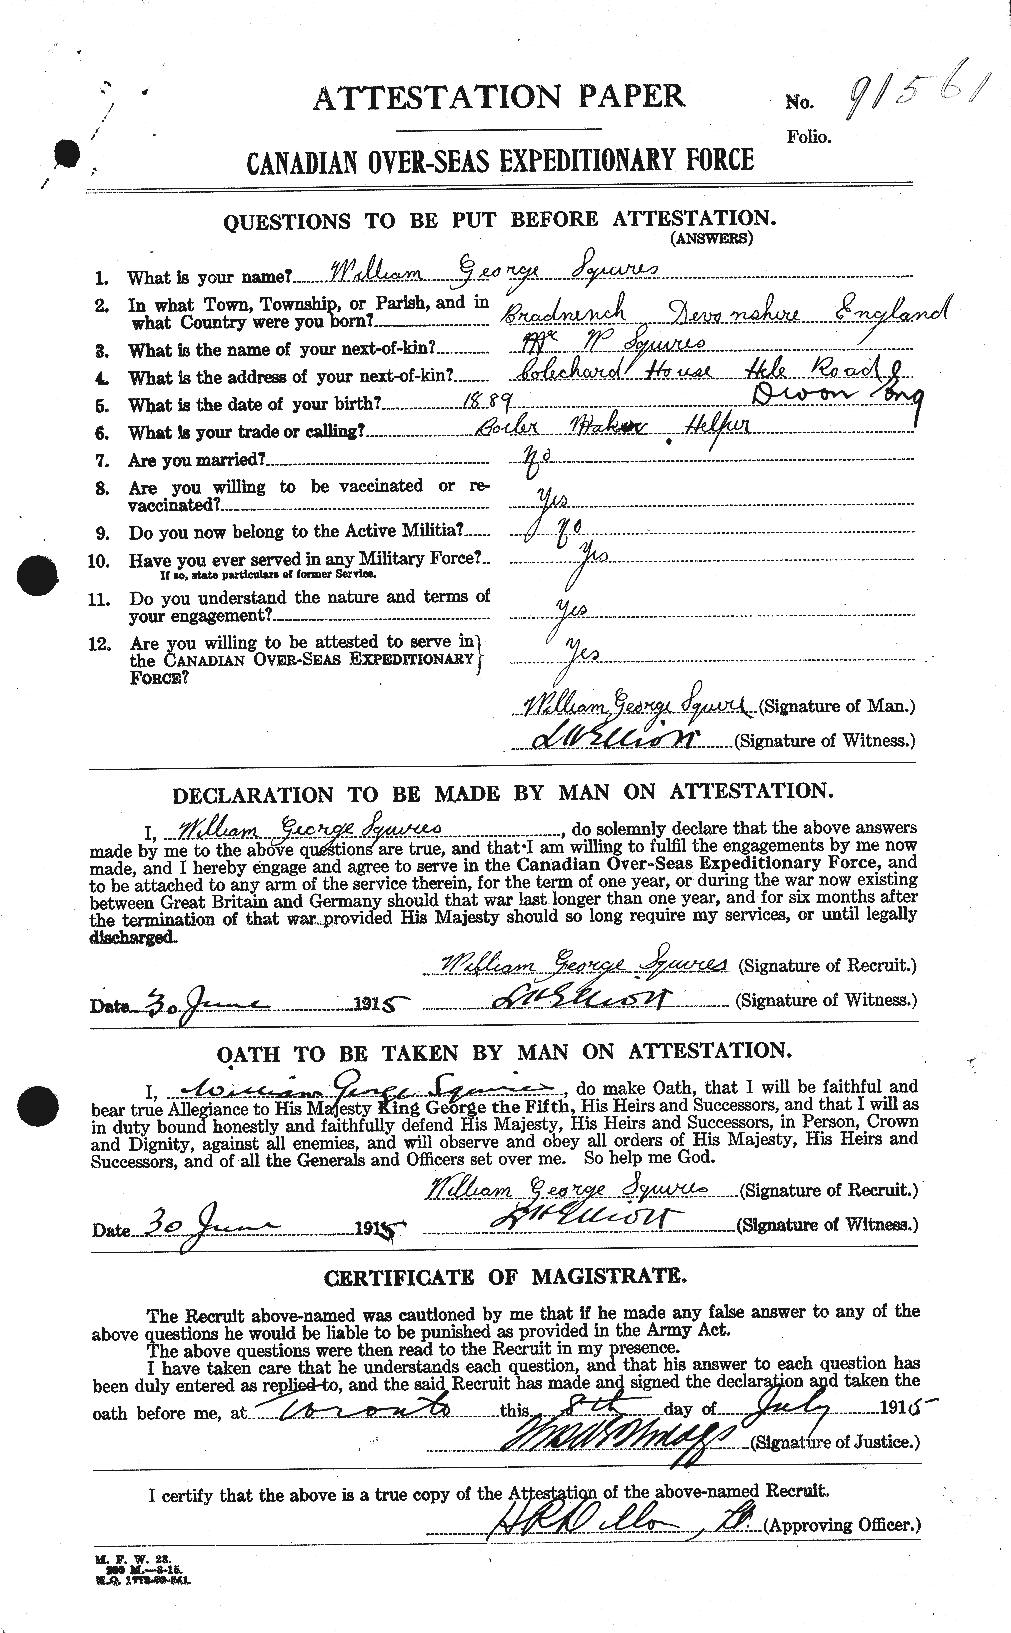 Personnel Records of the First World War - CEF 114248a